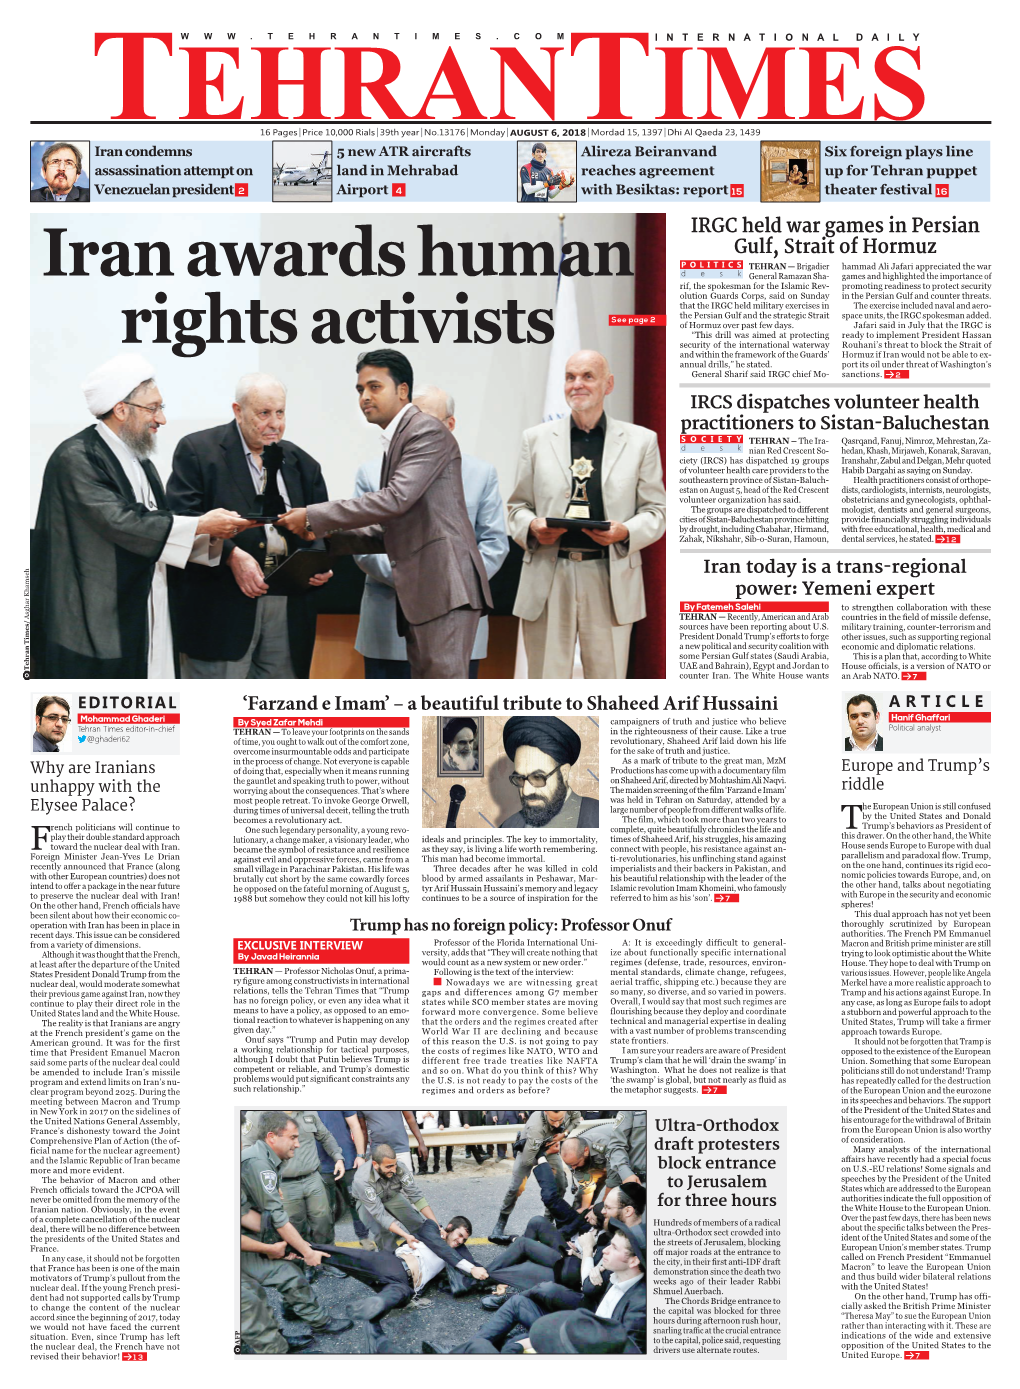 Iran Awards Human Rights Activists Deskazerbaijan Held Their First Joint Consular POLITICS TEHRAN — in a Ceremony Held on United Approaches Against Them